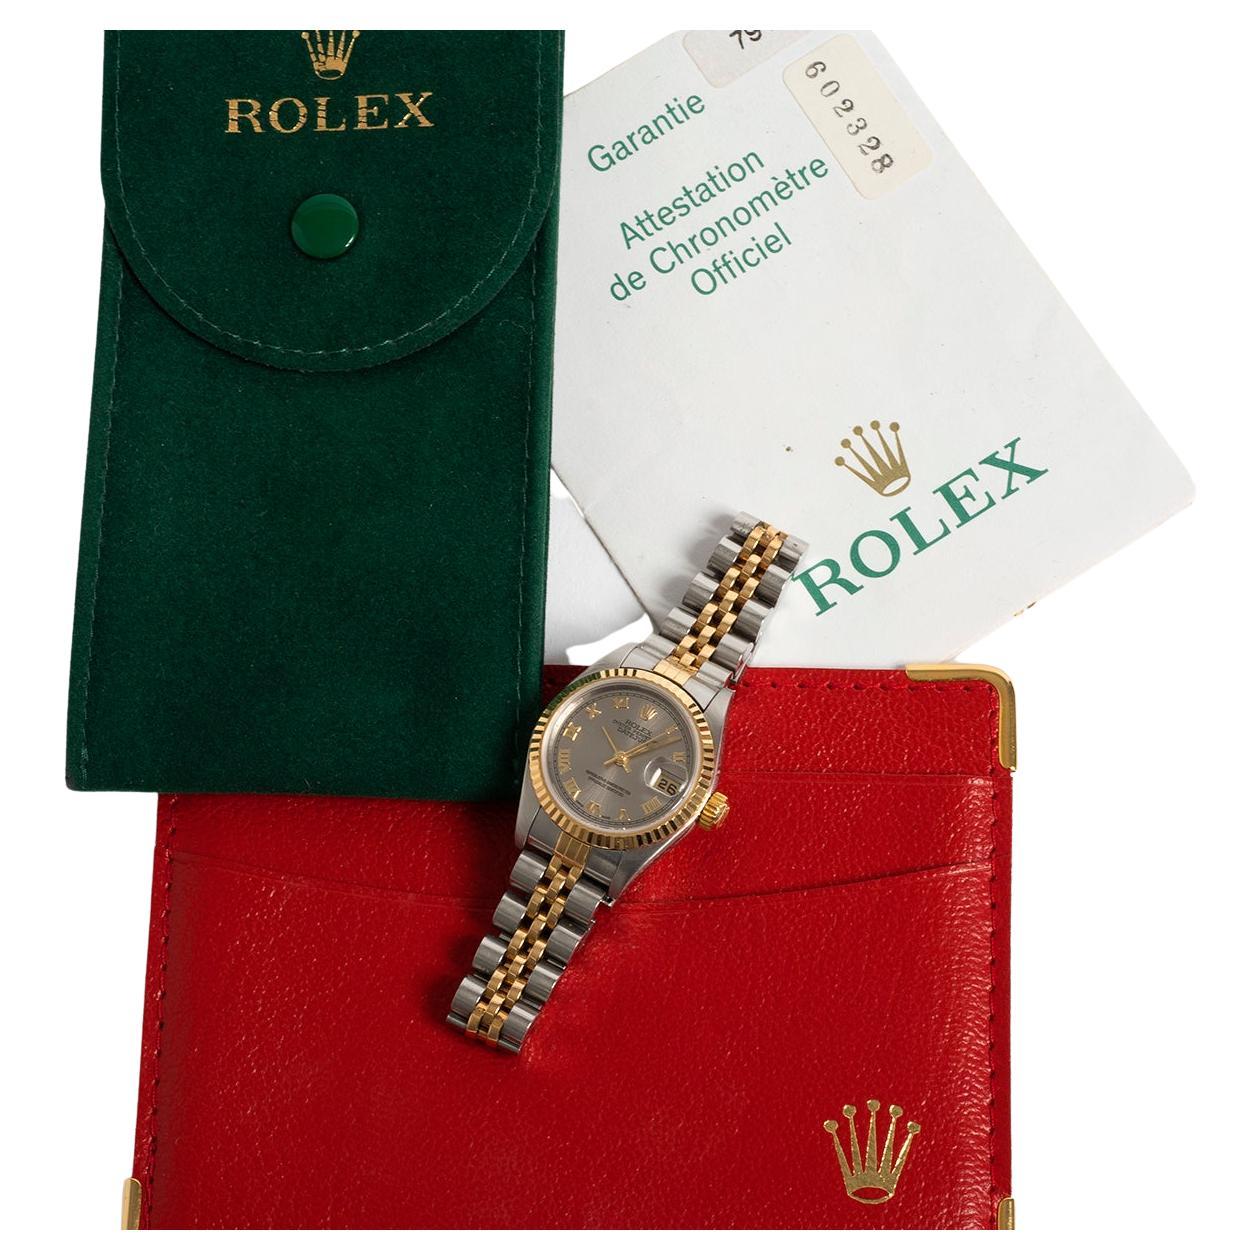 Our classic Rolex Lady Datejust reference 79173 features a 18k yellow gold and stainless steel case with fluted bezel and jubilee bracelet and rare rhodium grey dial with Roman Numerals. Presented in excellent condition with lights signs of use from